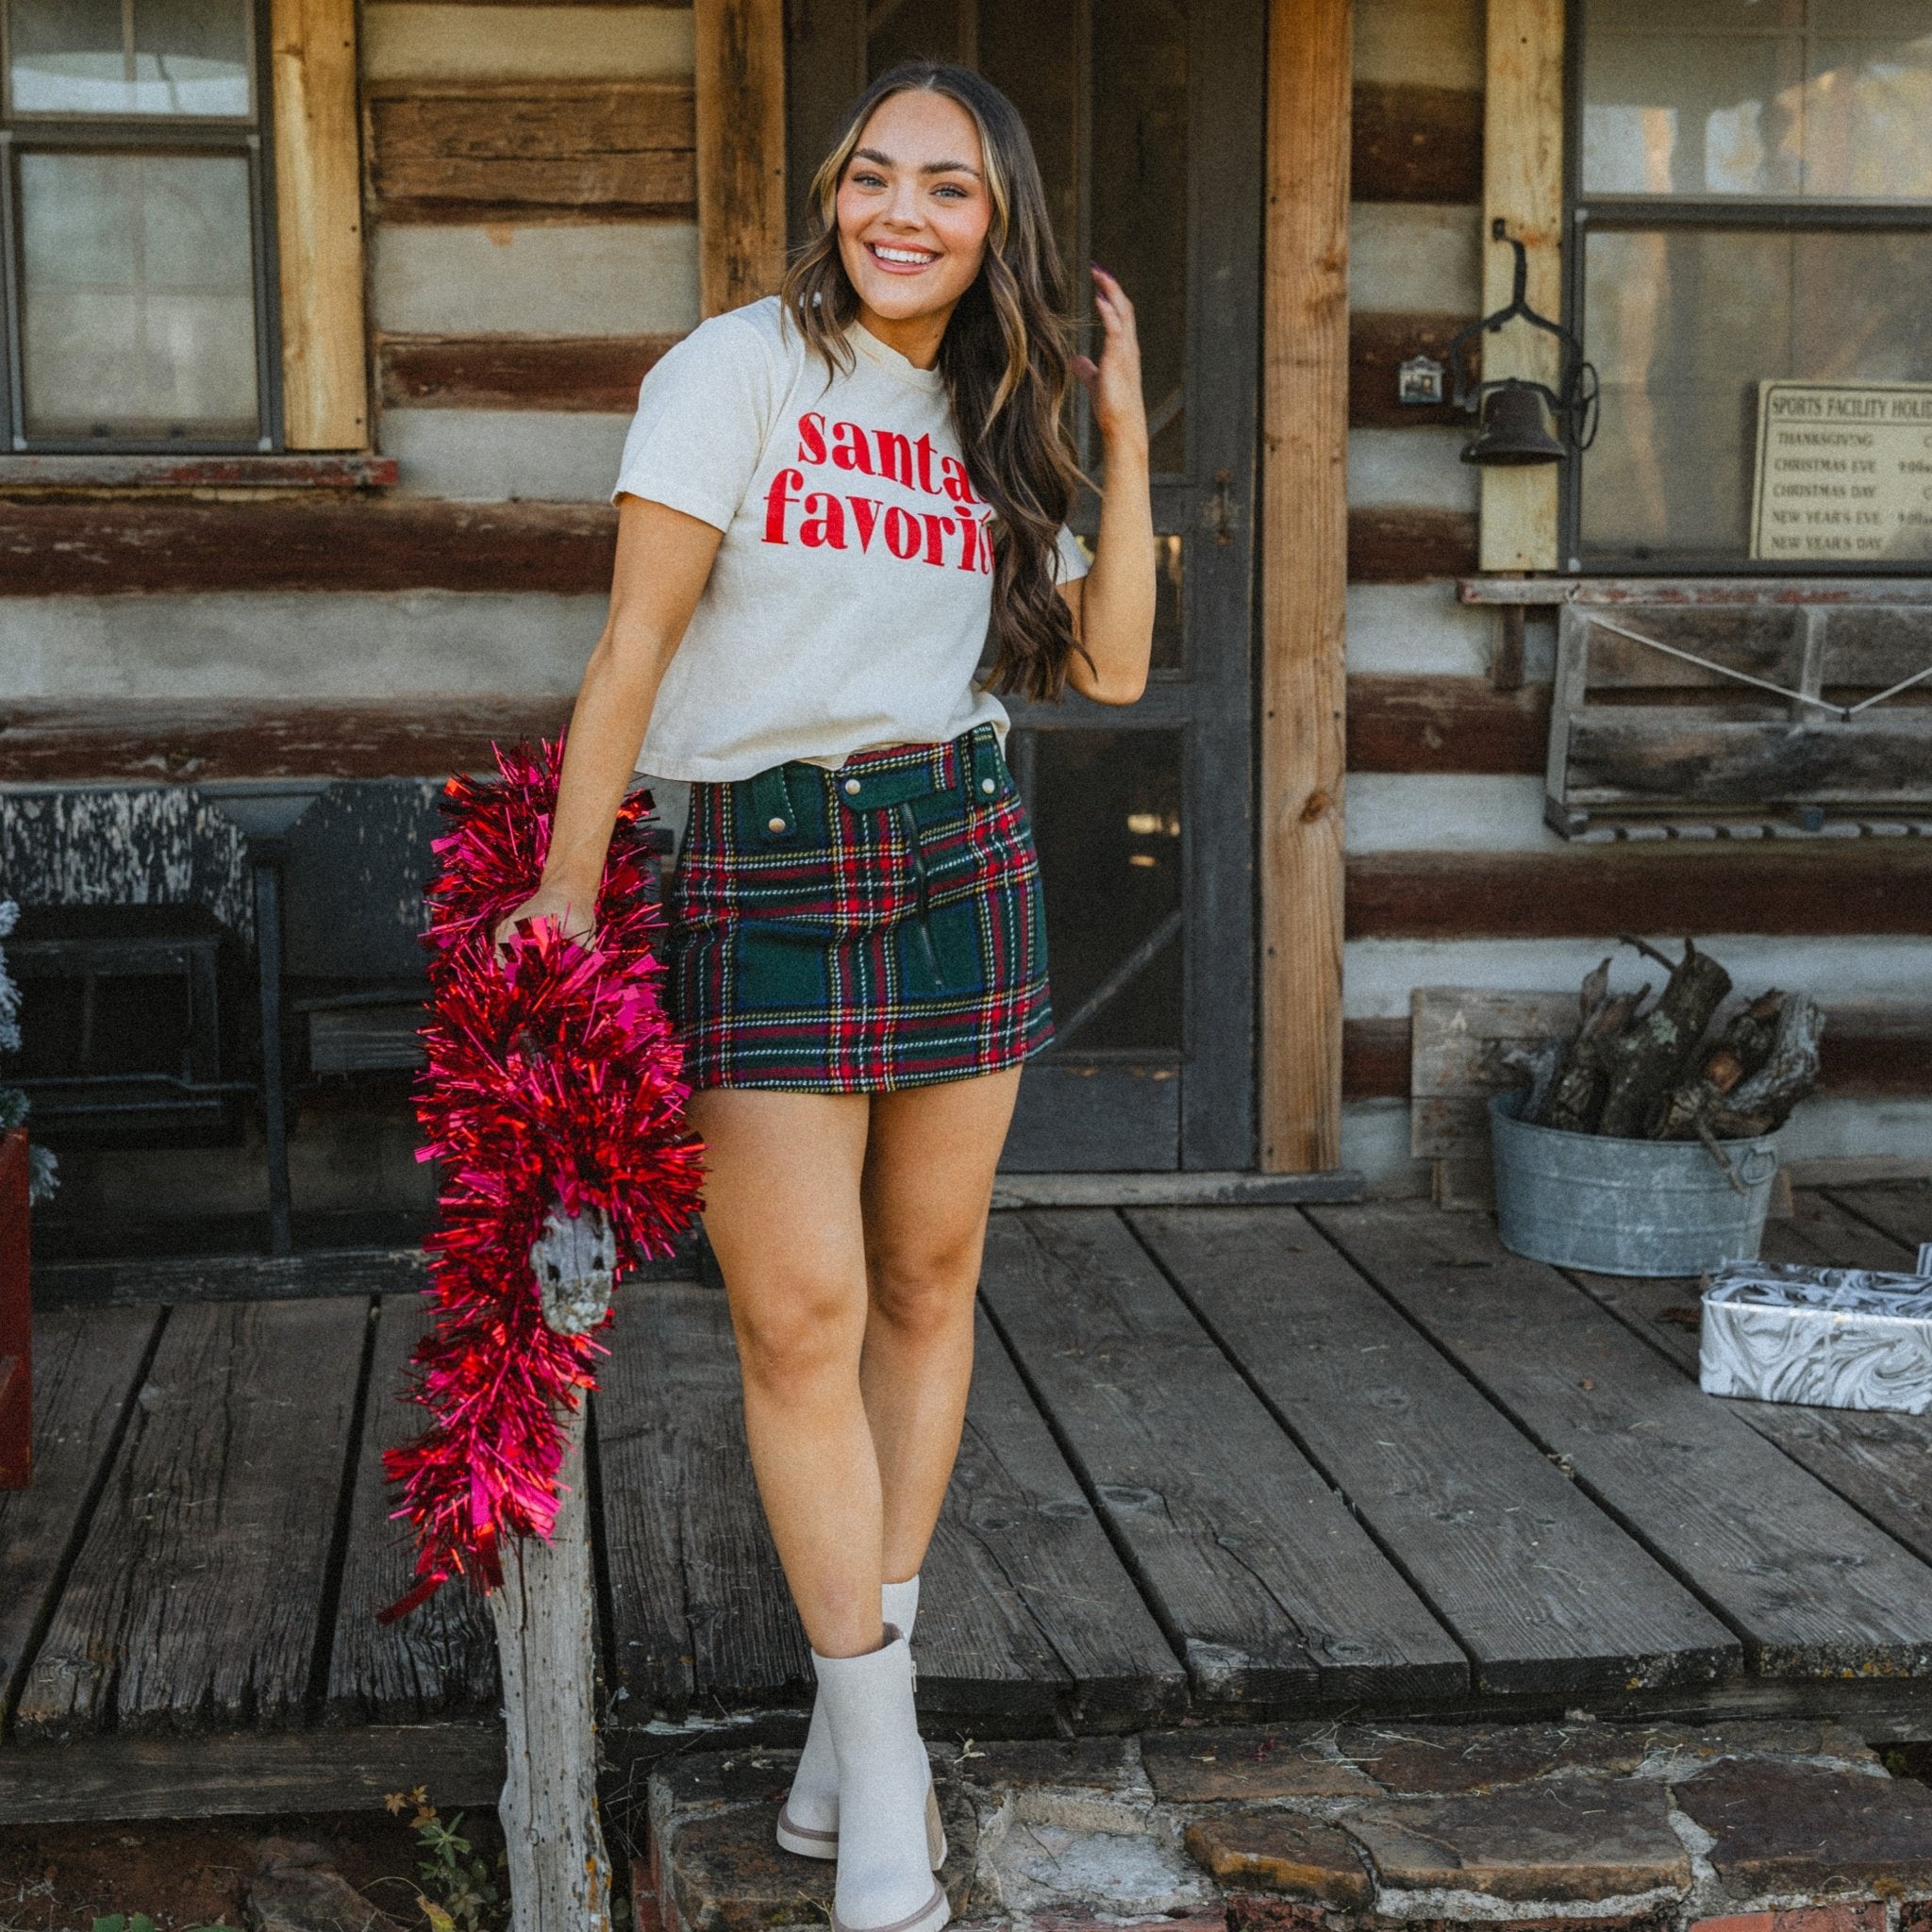 Lush Fashion Lounge women's boutique- Trendy Christmas outfits from Lush boutique, cute Holiday party outfits in Oklahoma, Santas favorite tshirt with green plaid skort 